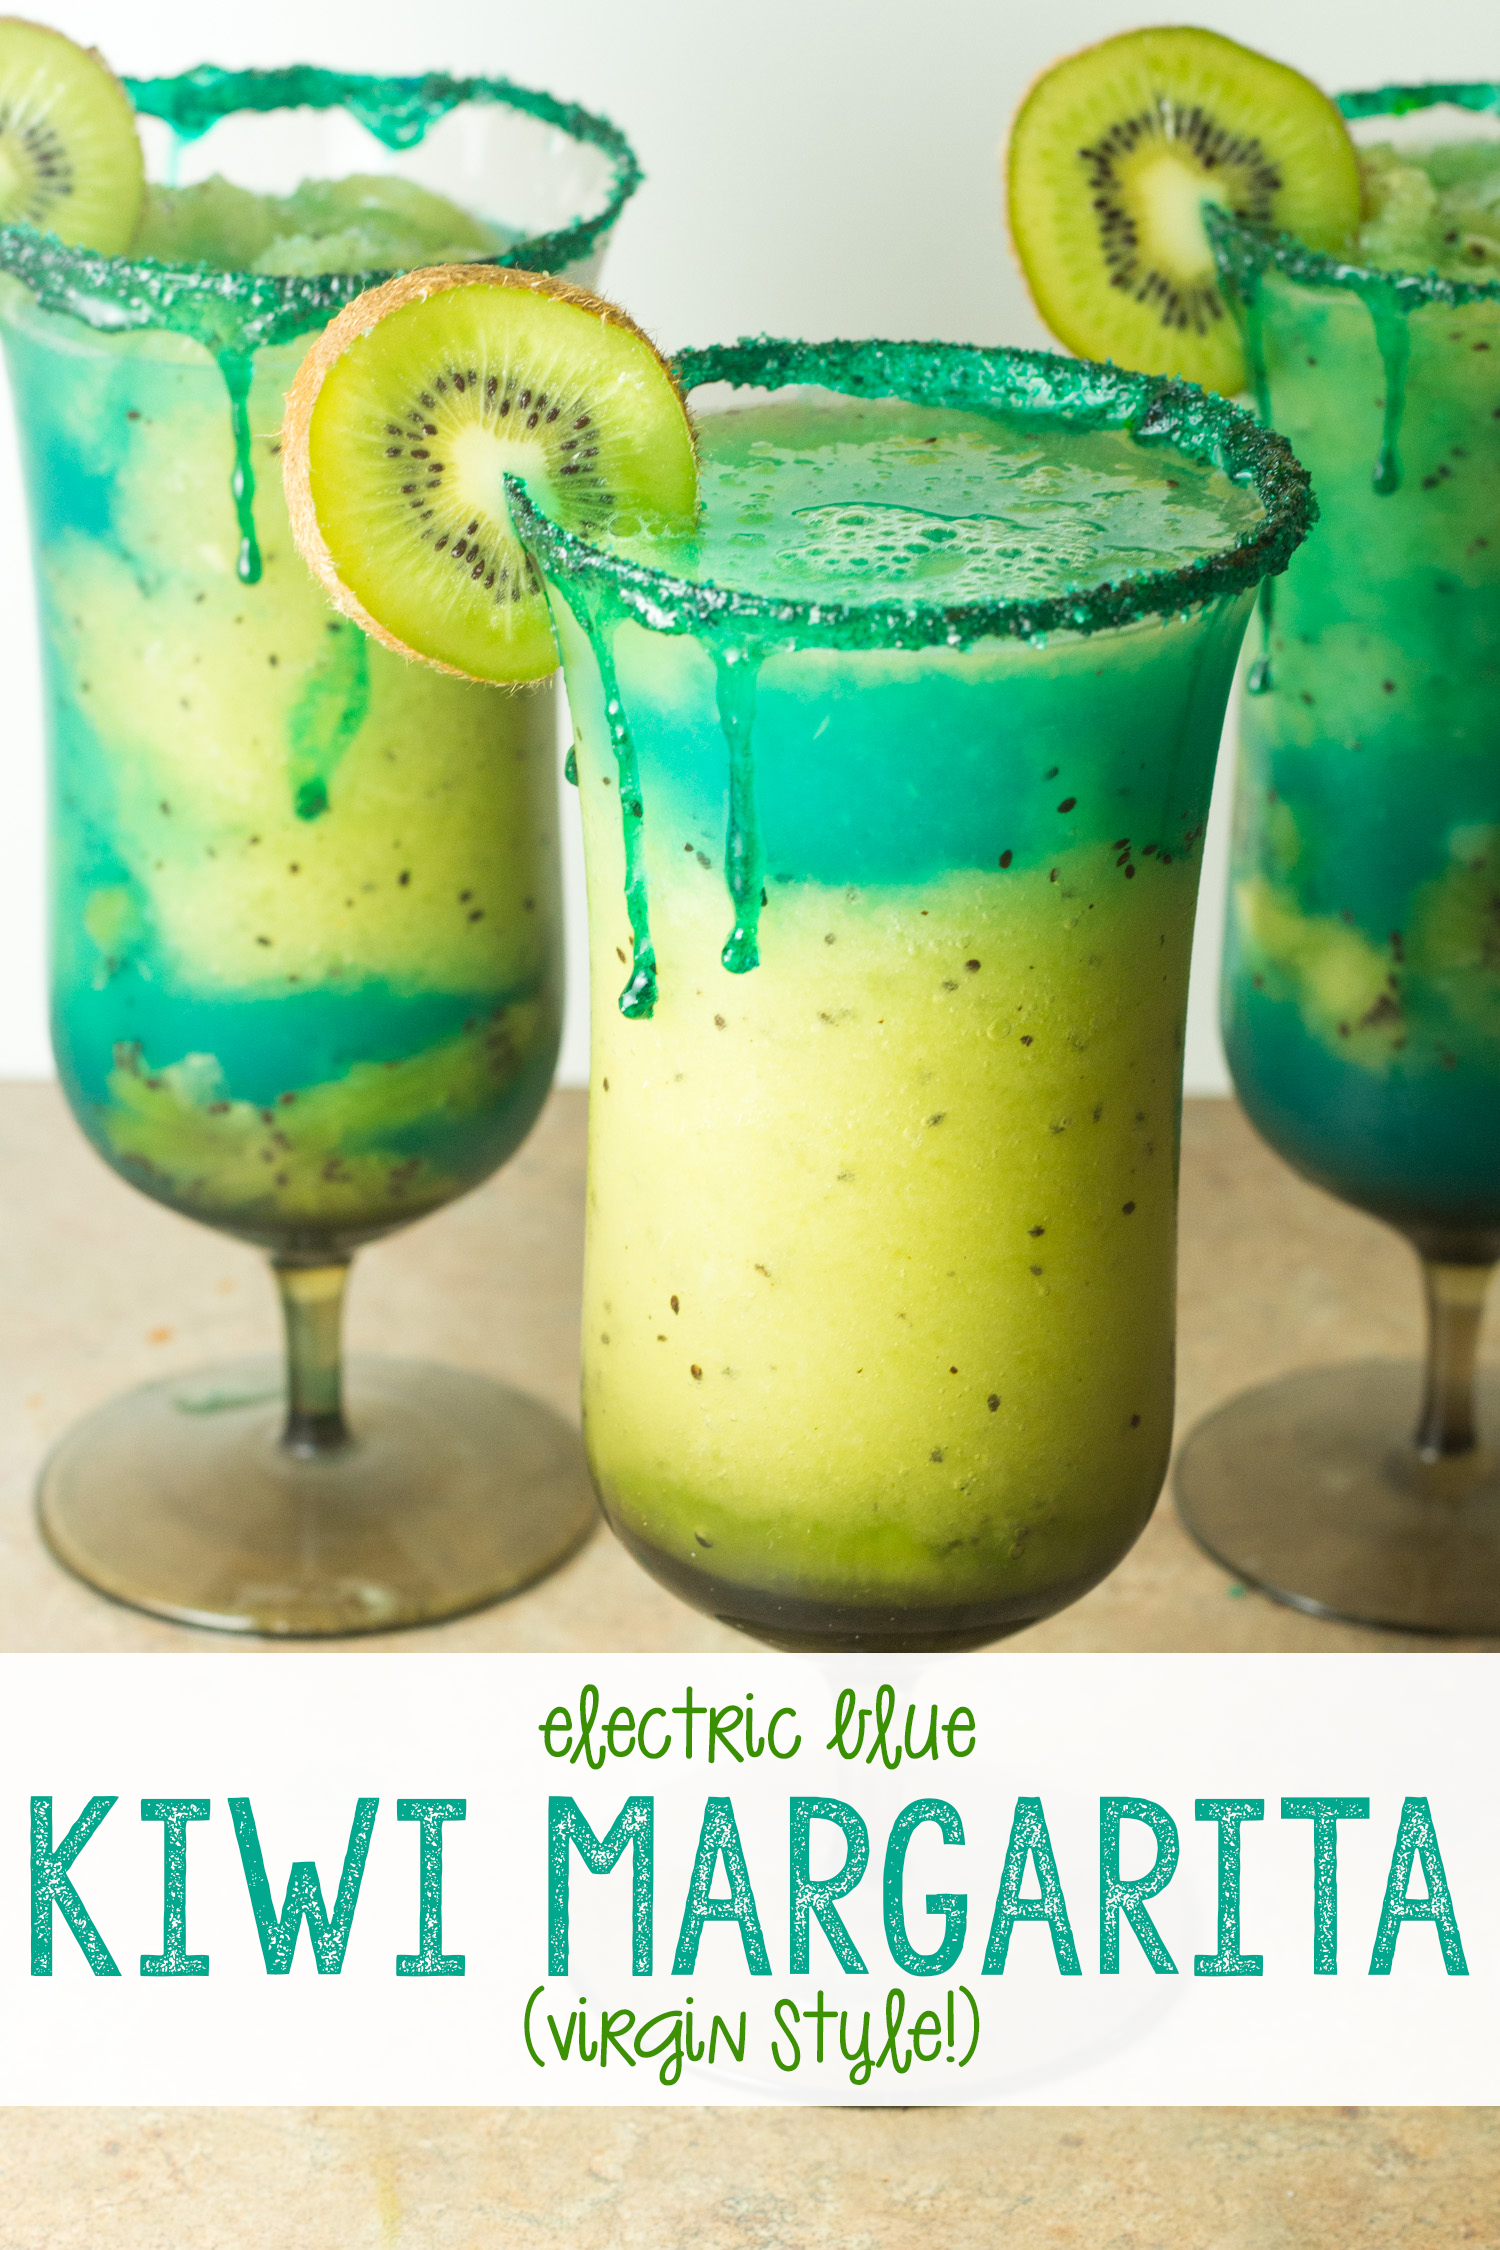 If you want all of the margarita fun and flavor and none of the alcohol, you'll love this totally virgin electric blue kiwi margarita! Hello, spring and summer! This has plenty of flavor-- lime and kiwi, blue and bright green, it's party-ready in no time. Virgin margarita recipe made quickly in your blender! | Virgin Kiwi Margarita | 